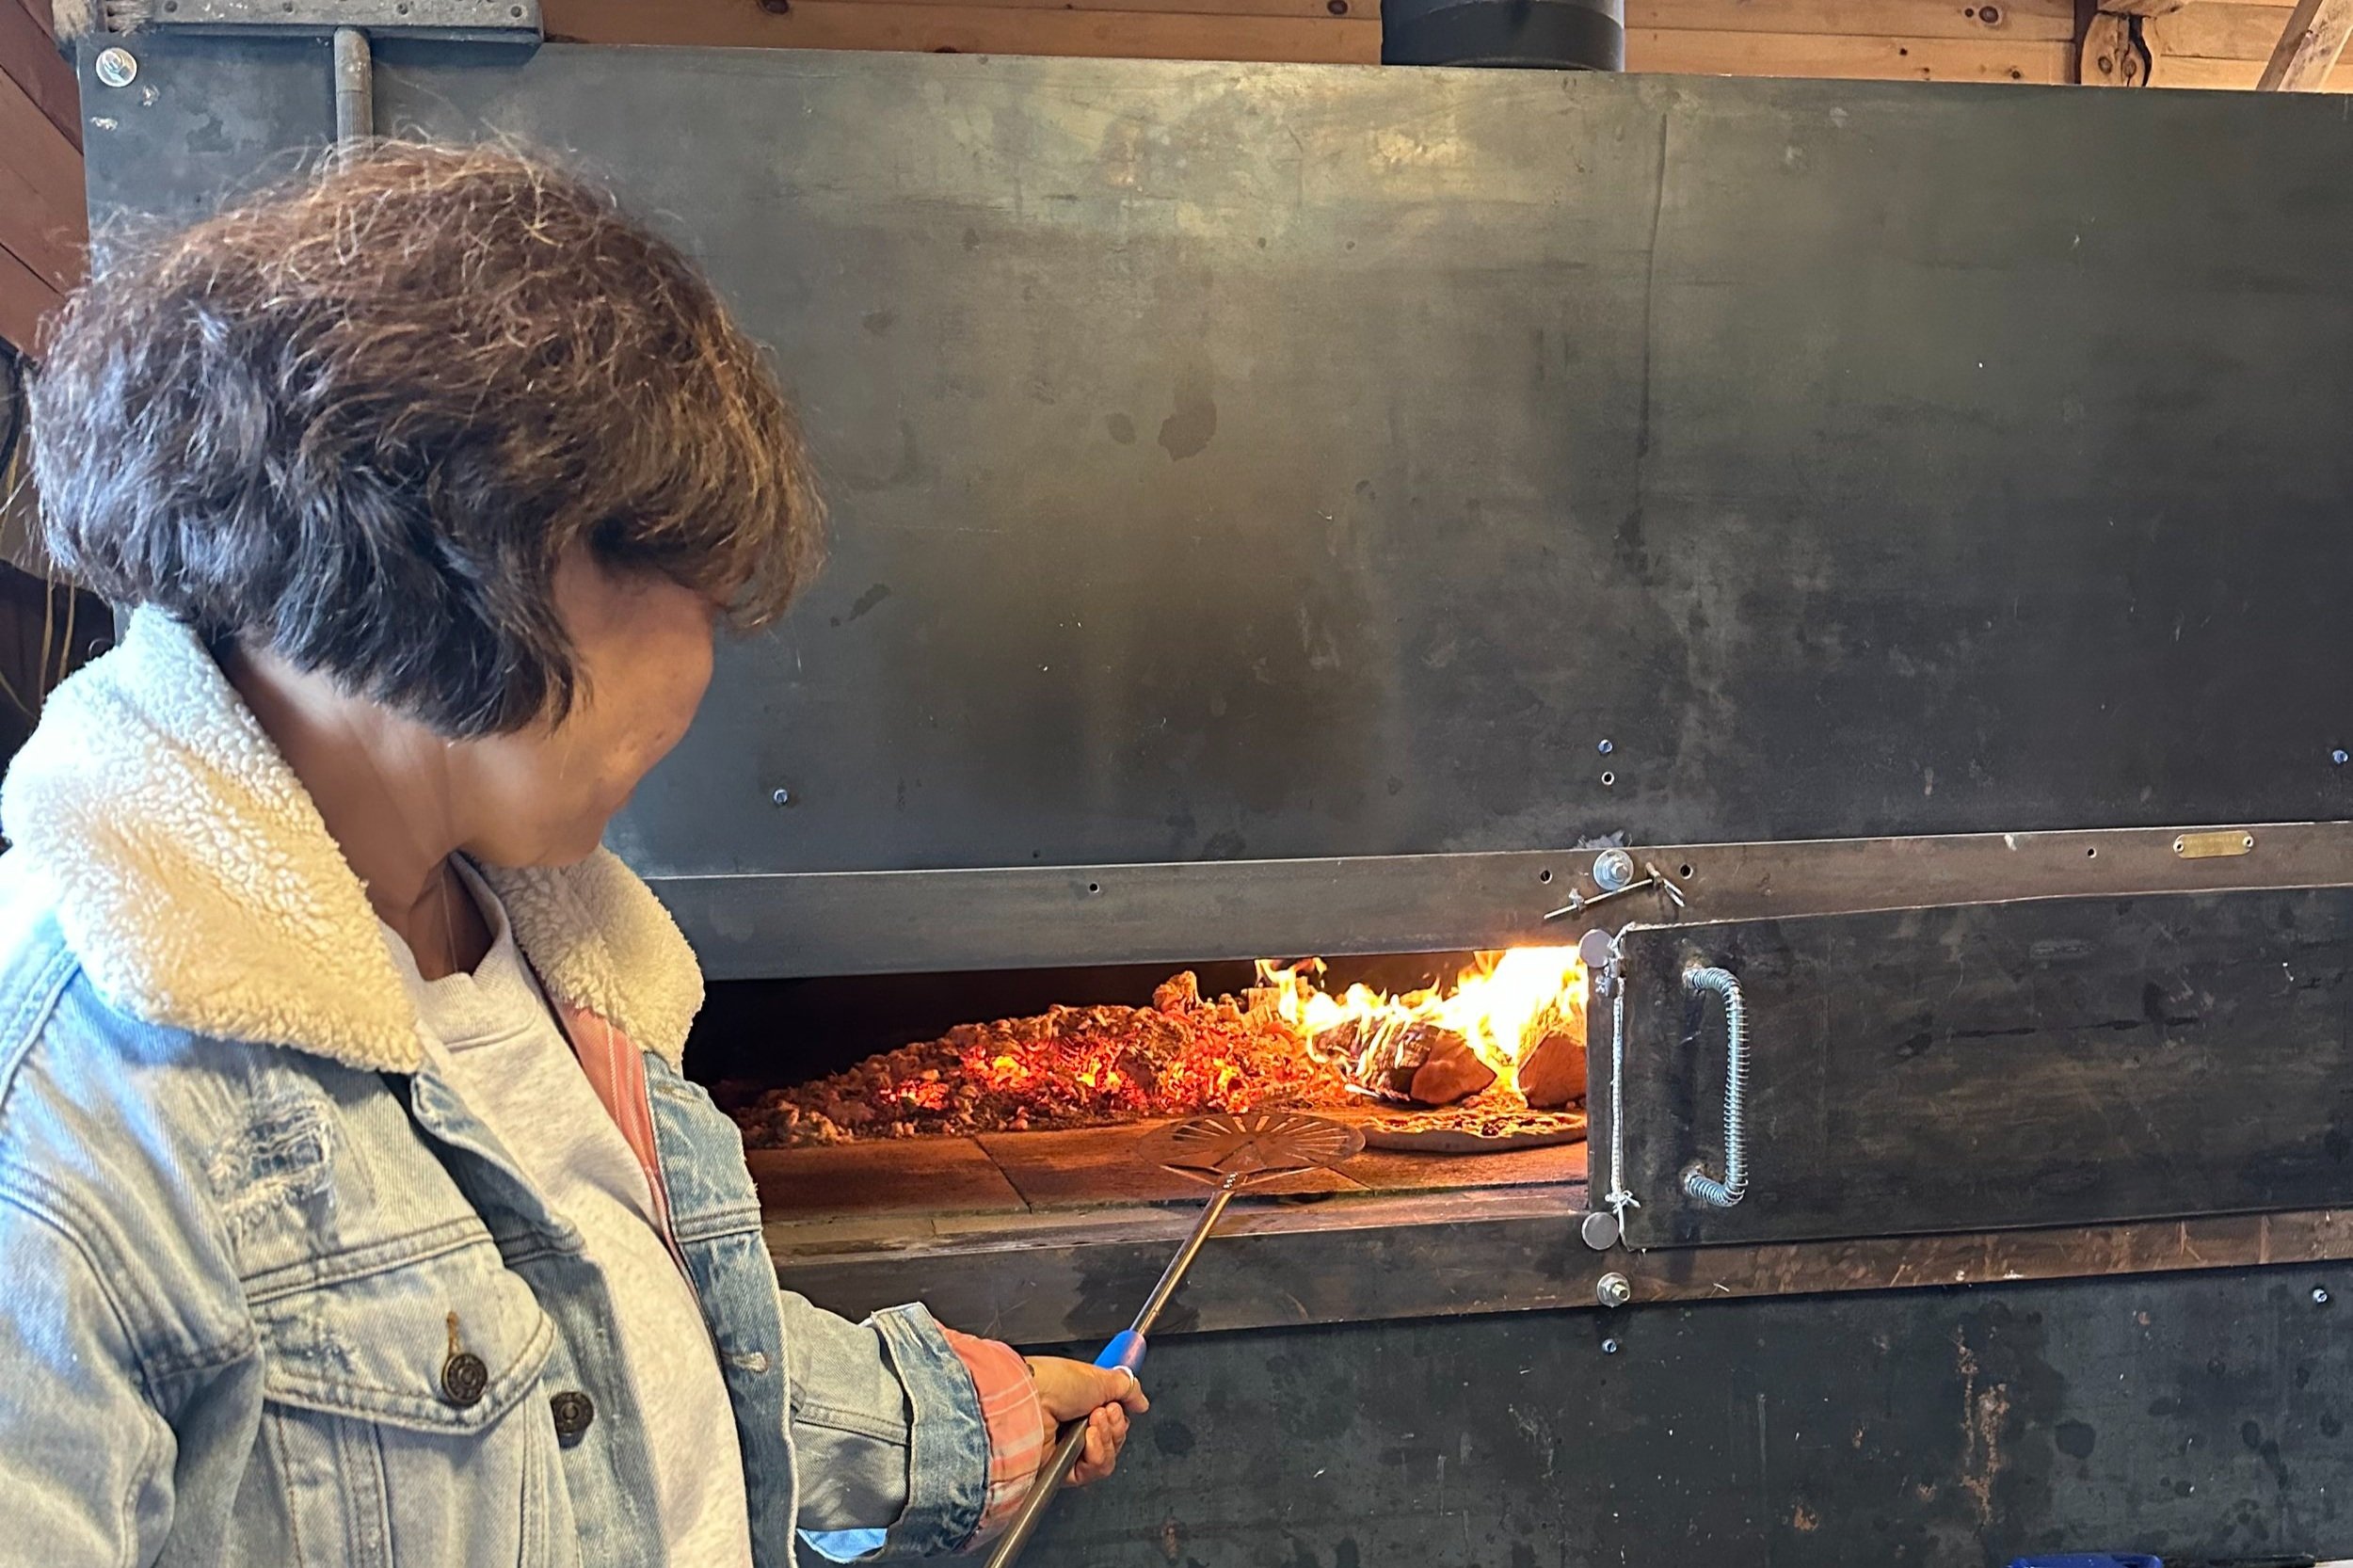 A Pizza Making Class in the Adirondacks